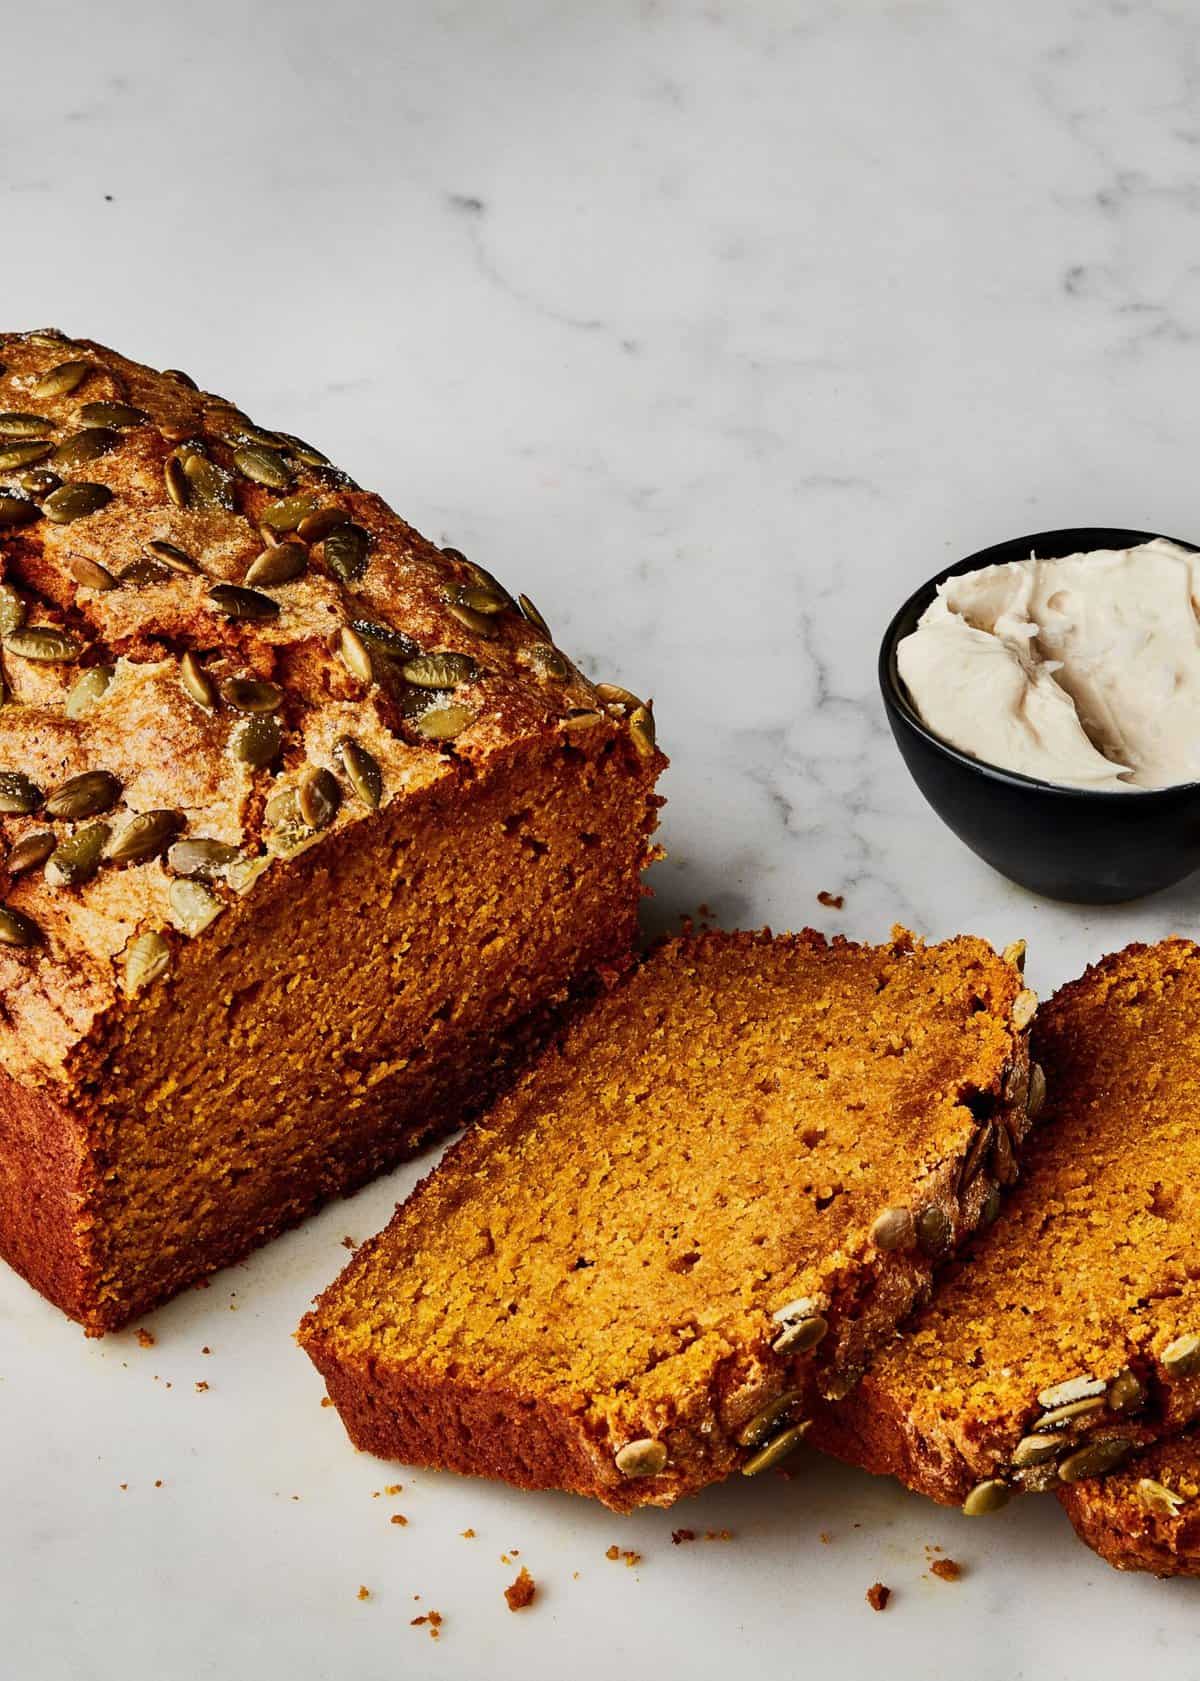  A slice of fall heaven: our maple pumpkin loaf